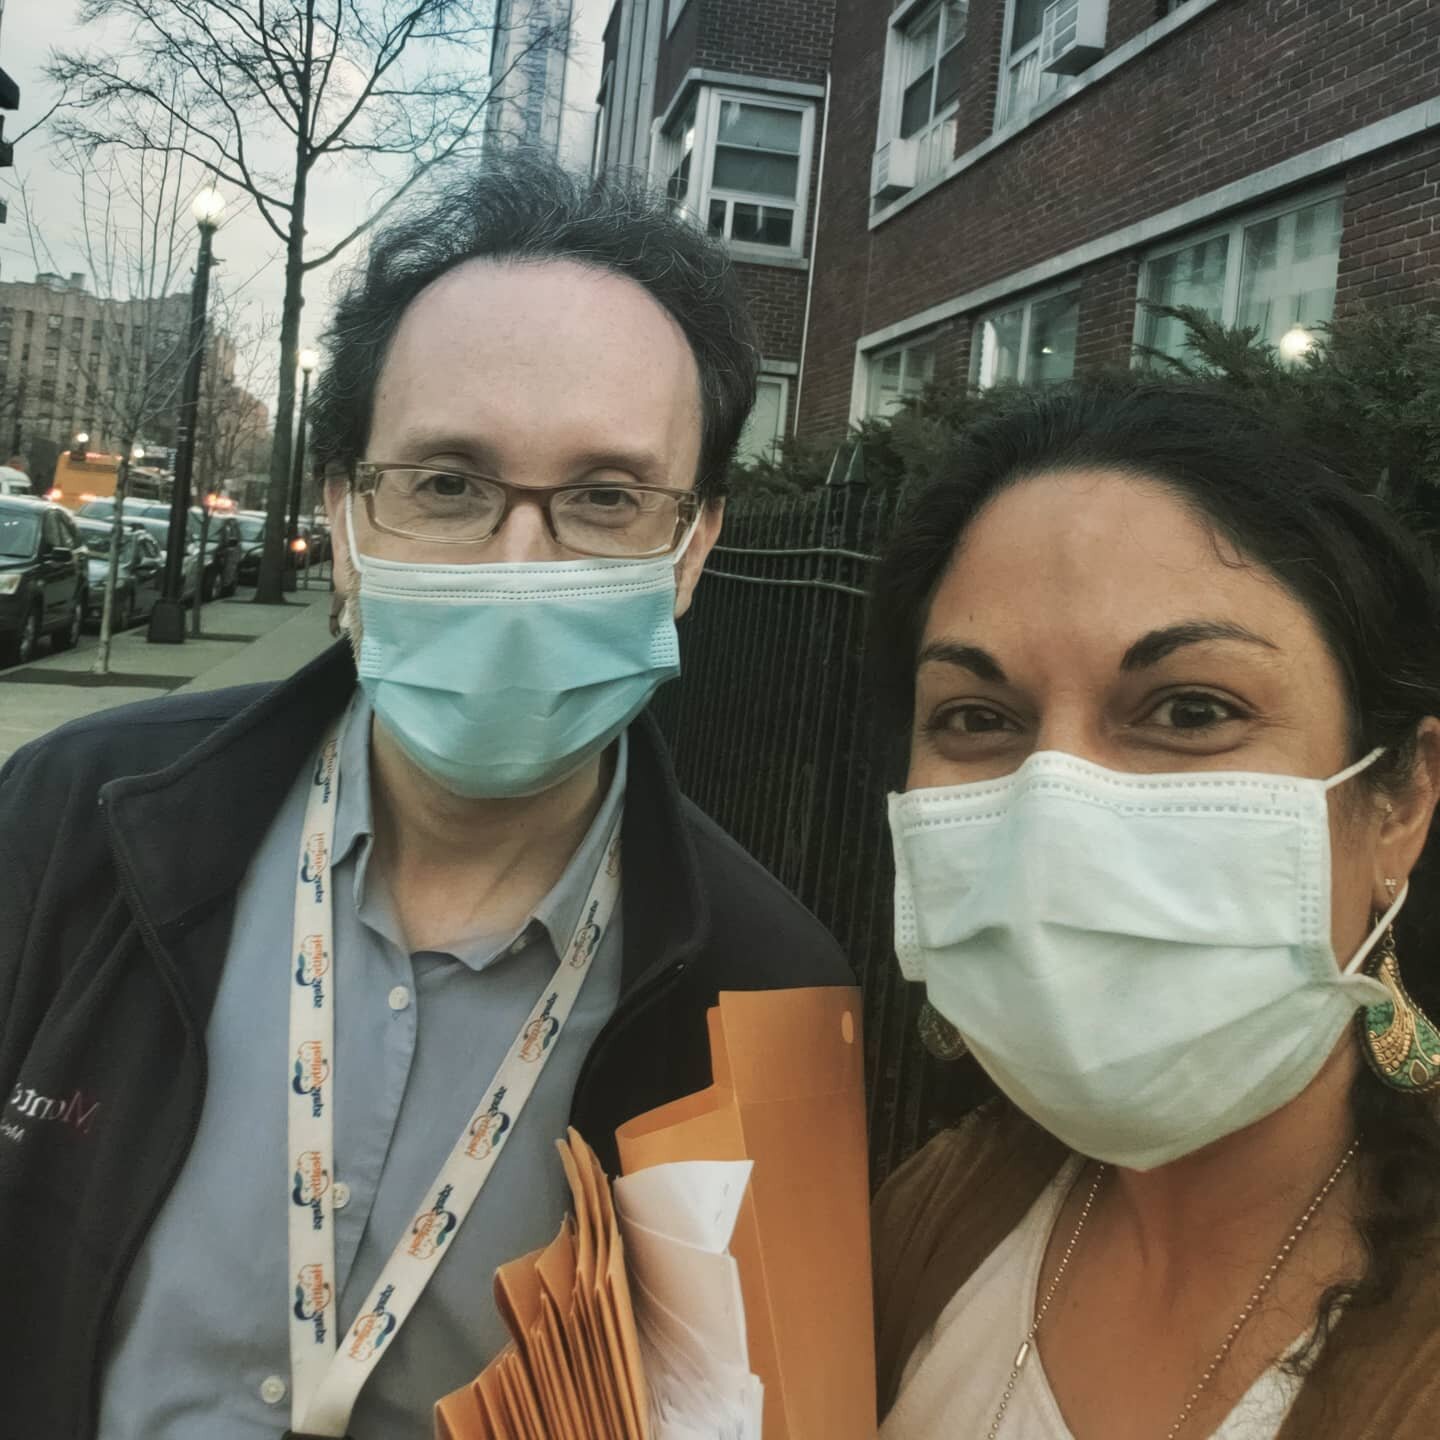 On the one year anniversary of the first COVID-19 patient admitted to Montefiore, two of our psychologists Dr. Bulman and Dr. Bhattacharyya facilitated a poetry writing and crane making workshop for our Community and Population Health Educator team, 